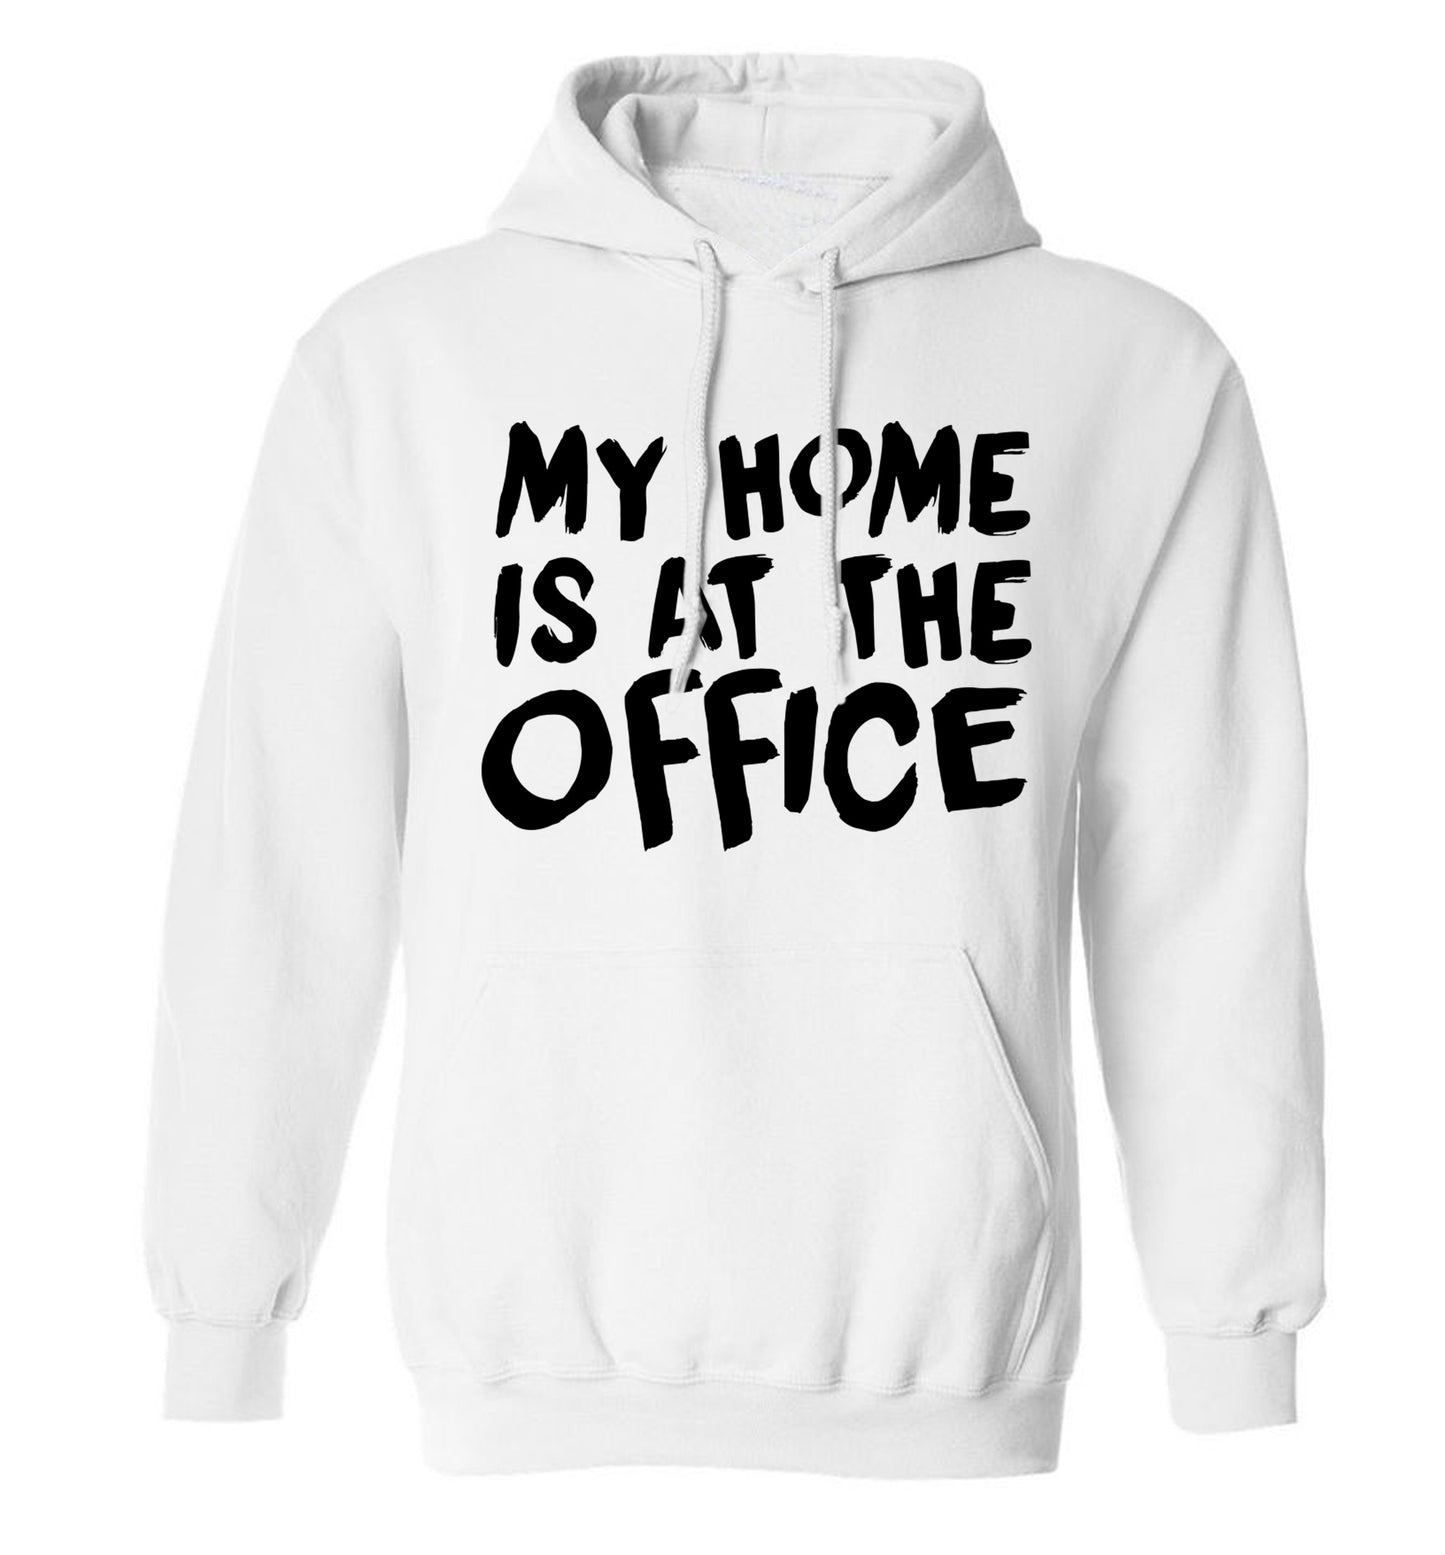 My home is at the office adults unisex white hoodie 2XL